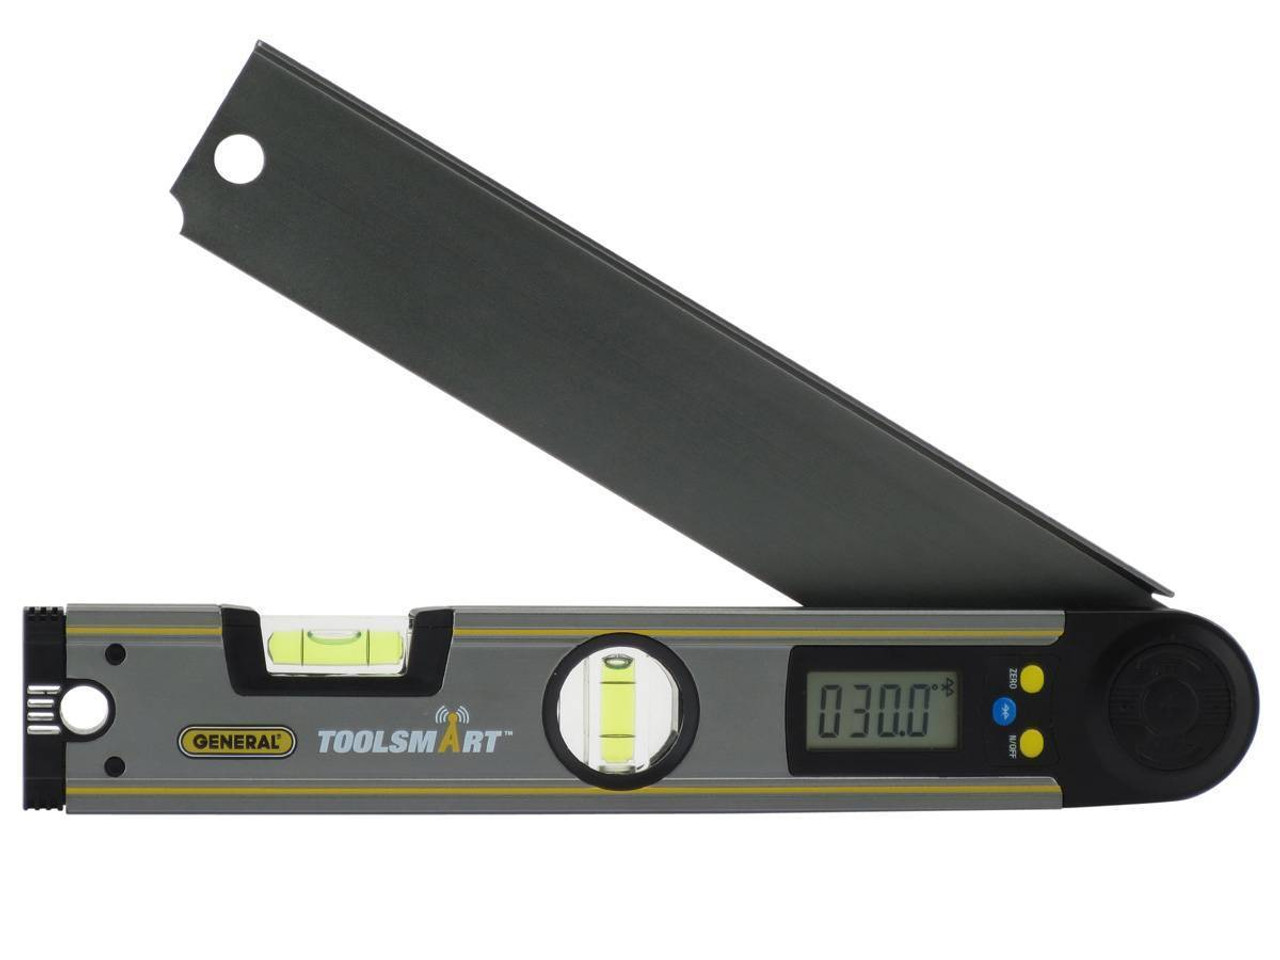 General ToolSmart Bluetooth Connected Digital Angle Finder TS02